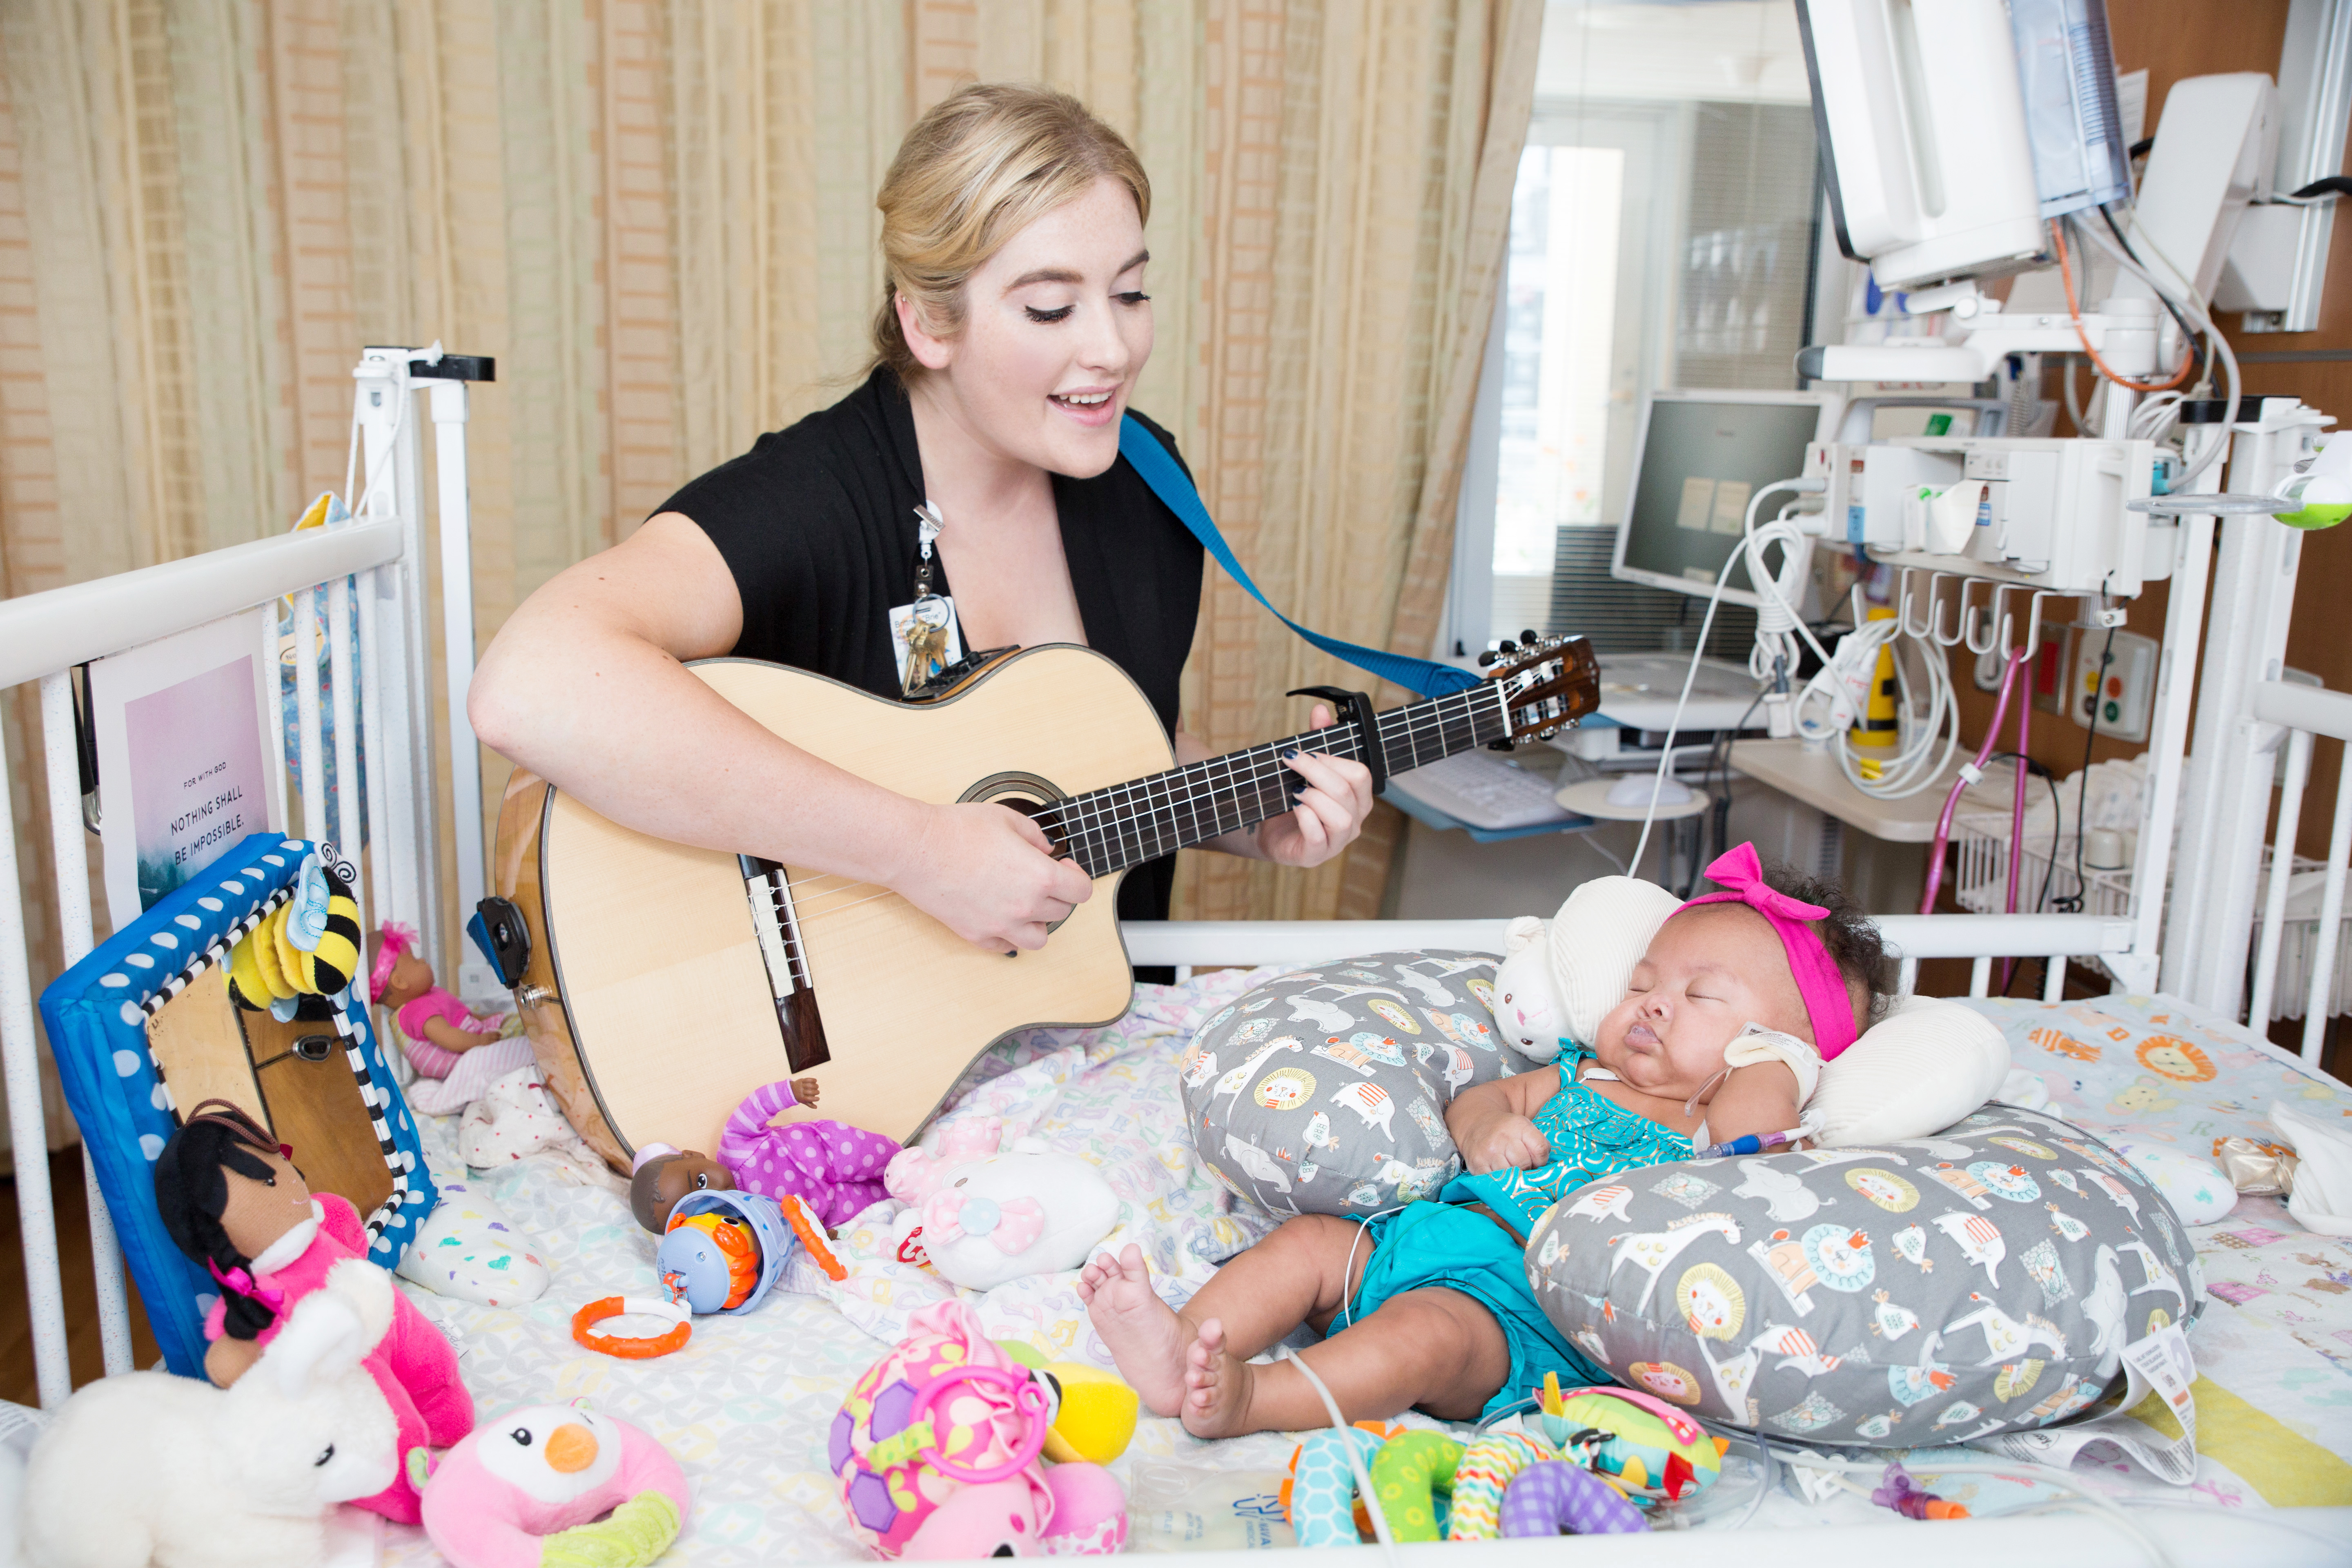 Music therapist with guitar singing to patient